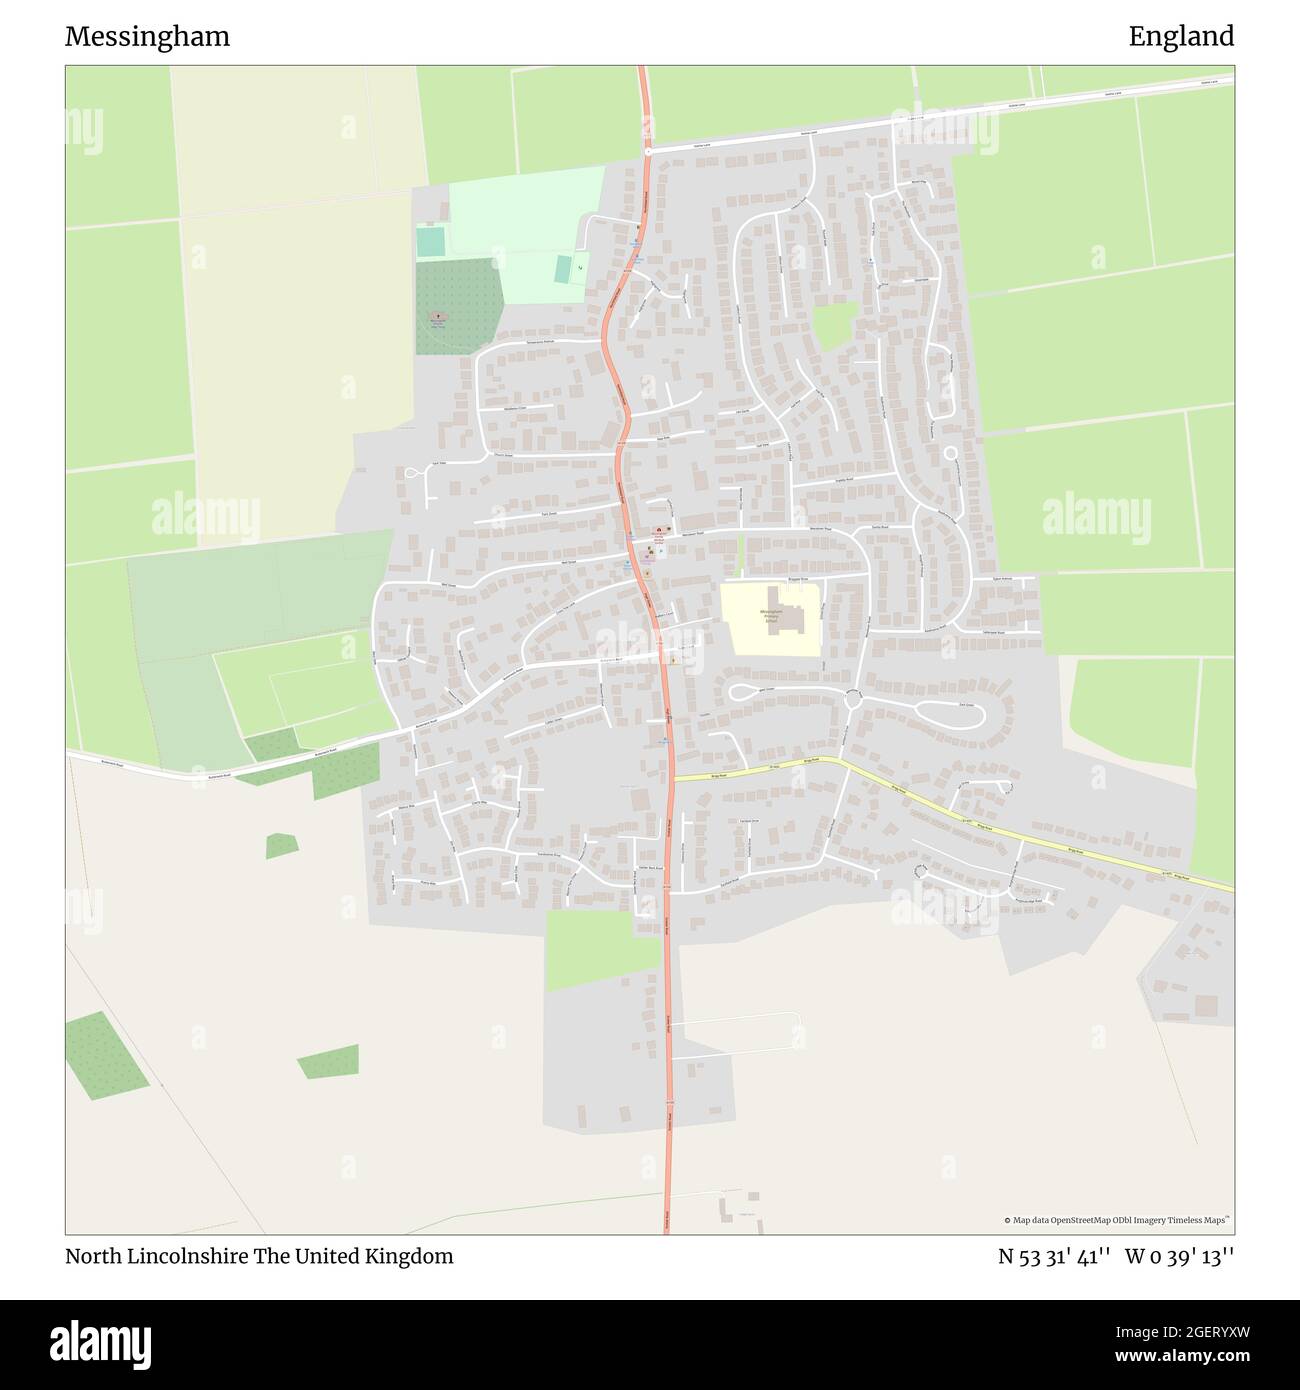 Messingham, North Lincolnshire, United Kingdom, England, N 53 31' 41'', W 0 39' 13'', map, Timeless Map published in 2021. Travelers, explorers and adventurers like Florence Nightingale, David Livingstone, Ernest Shackleton, Lewis and Clark and Sherlock Holmes relied on maps to plan travels to the world's most remote corners, Timeless Maps is mapping most locations on the globe, showing the achievement of great dreams Stock Photo